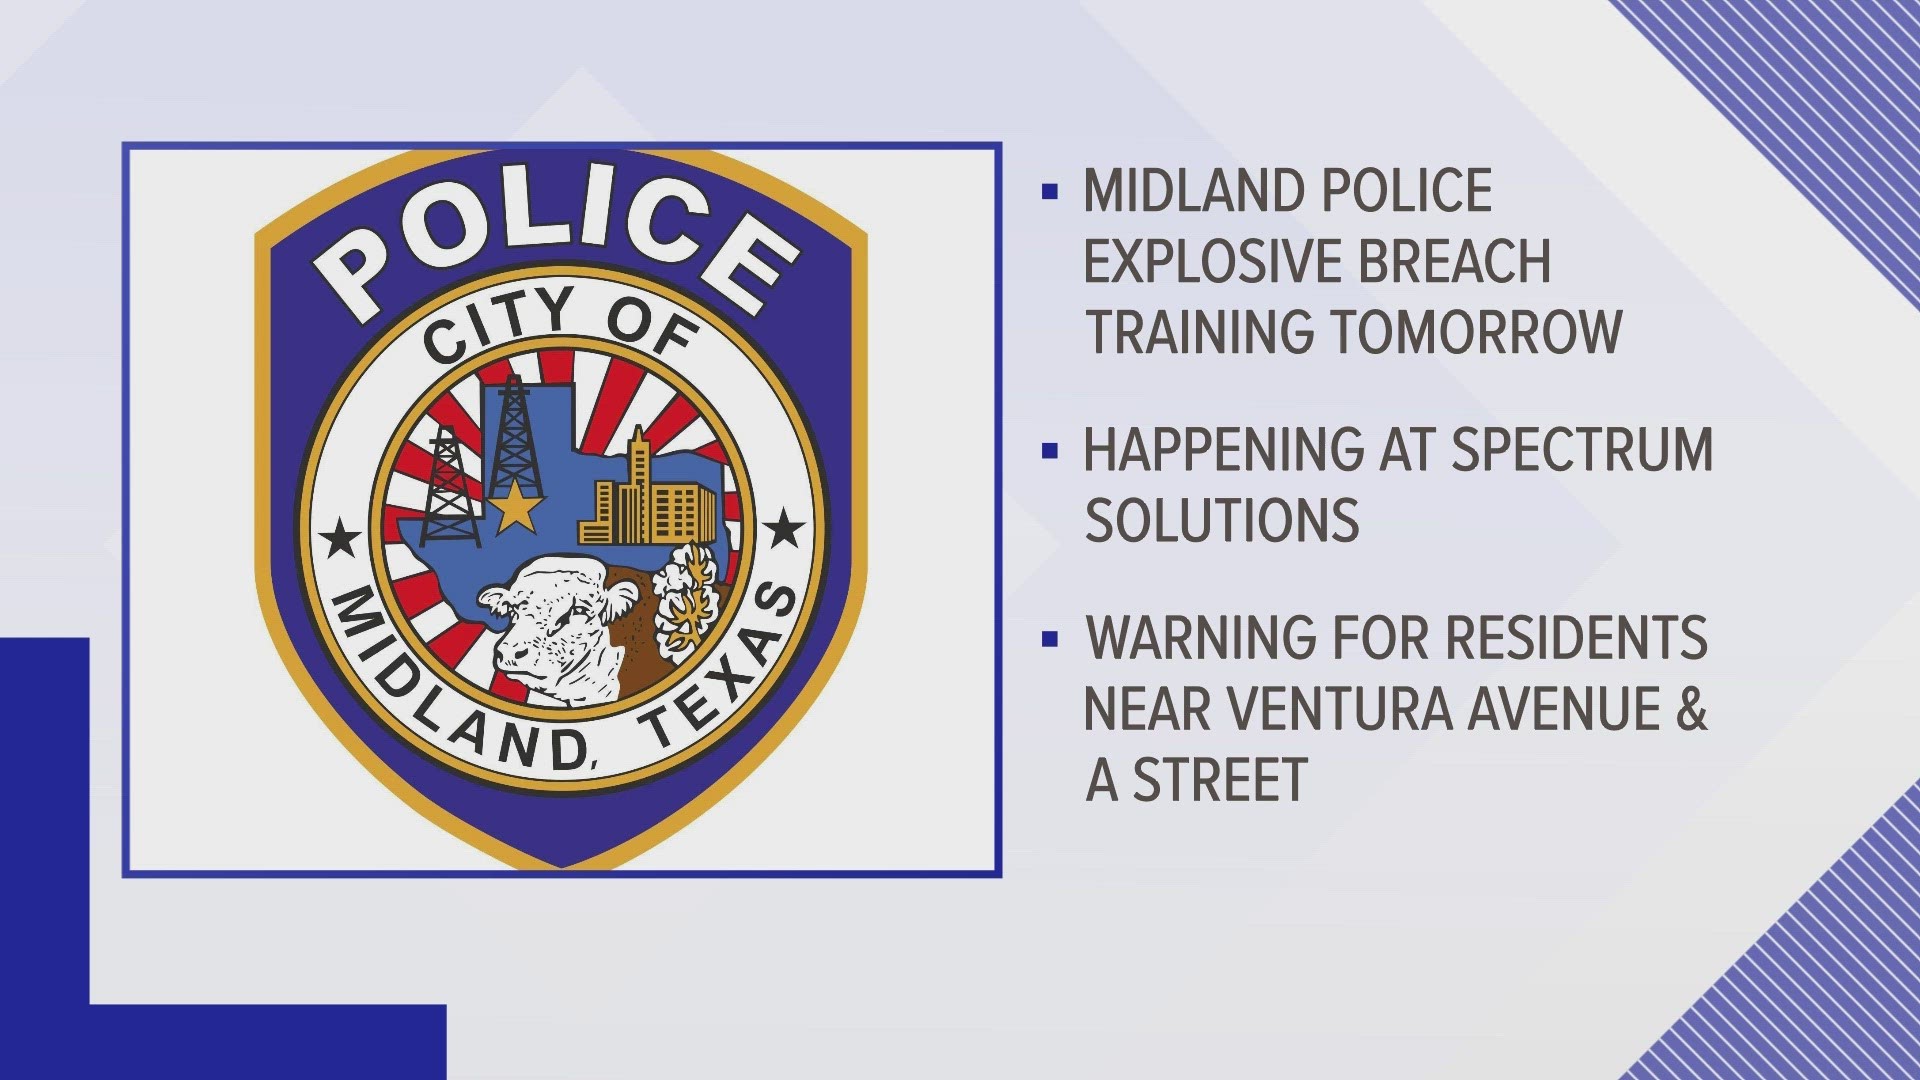 There will be a heavy police presence during this training at the building previously known as Spectrum Solutions.